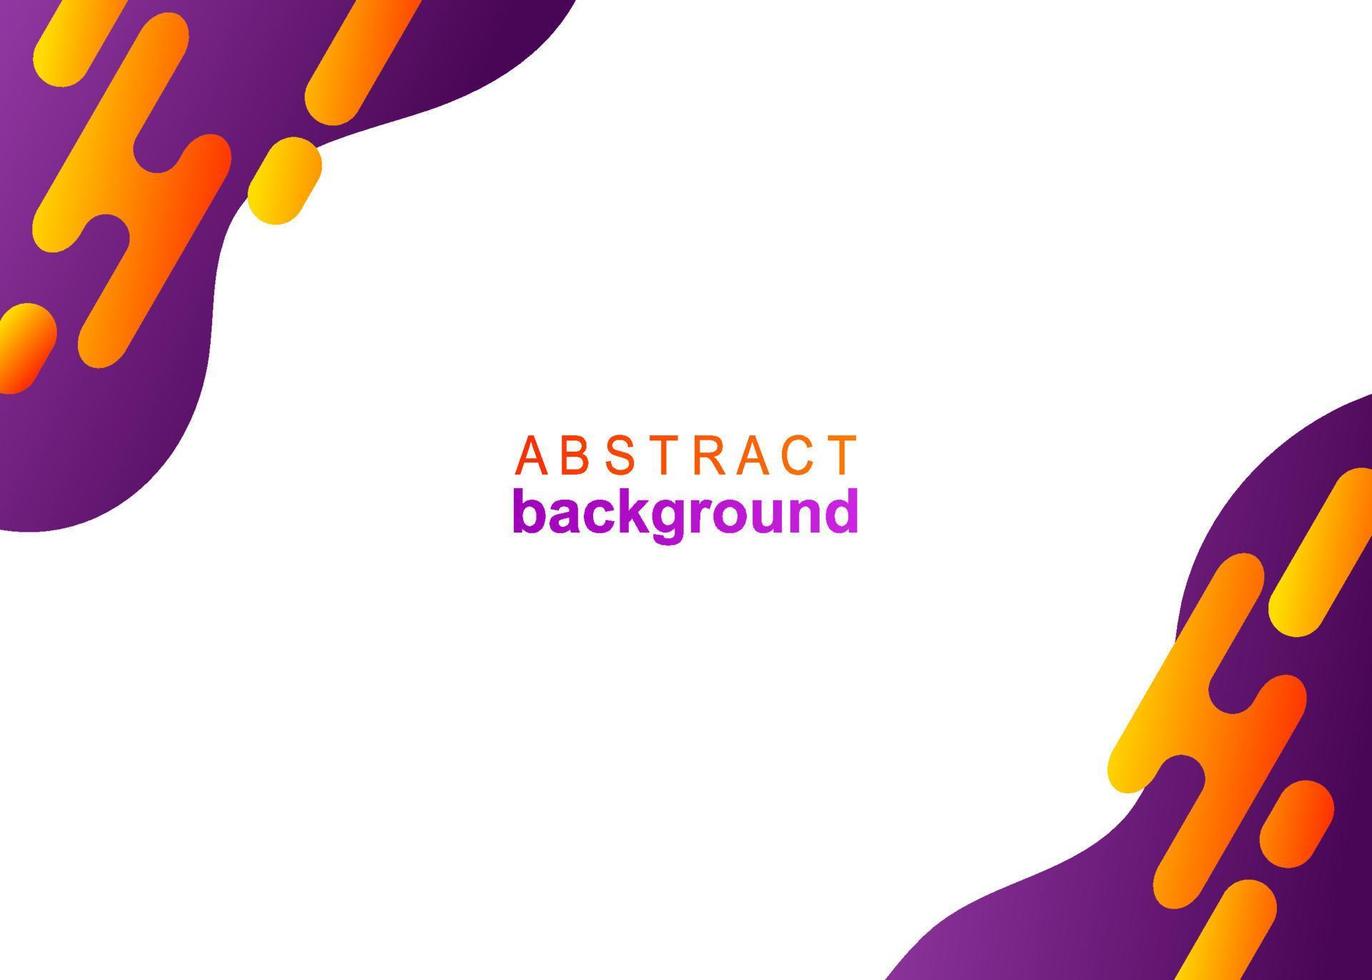 abstract background design vector